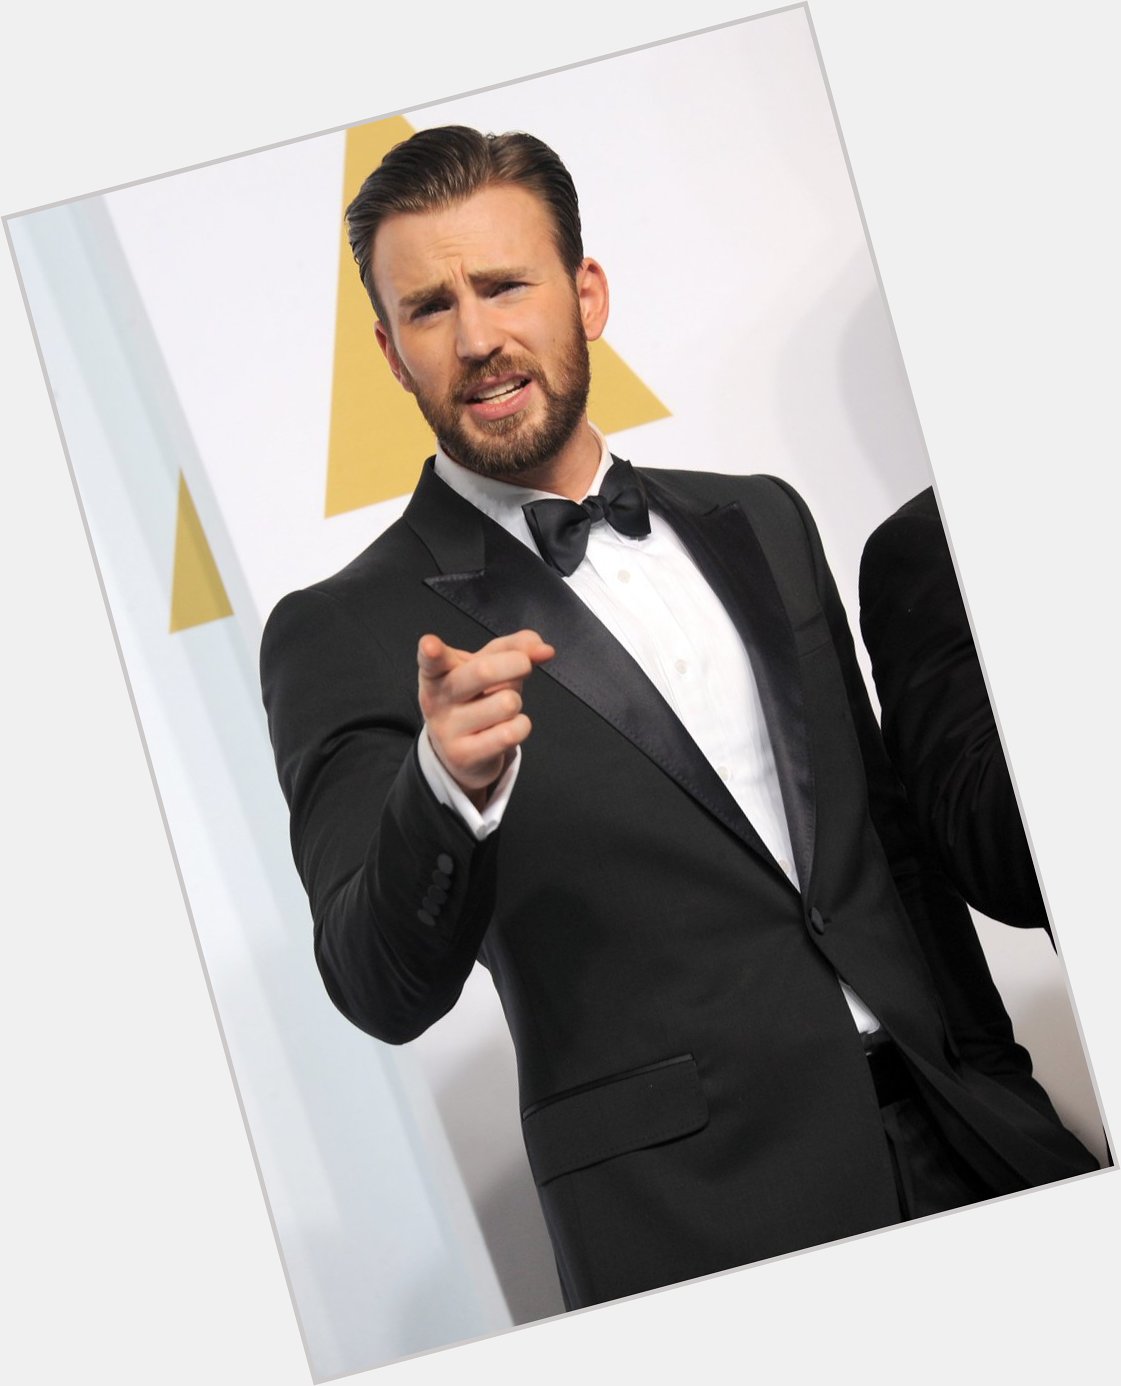 Happy birthday to Chris Evans, but specifically Bearded Chris Evans 